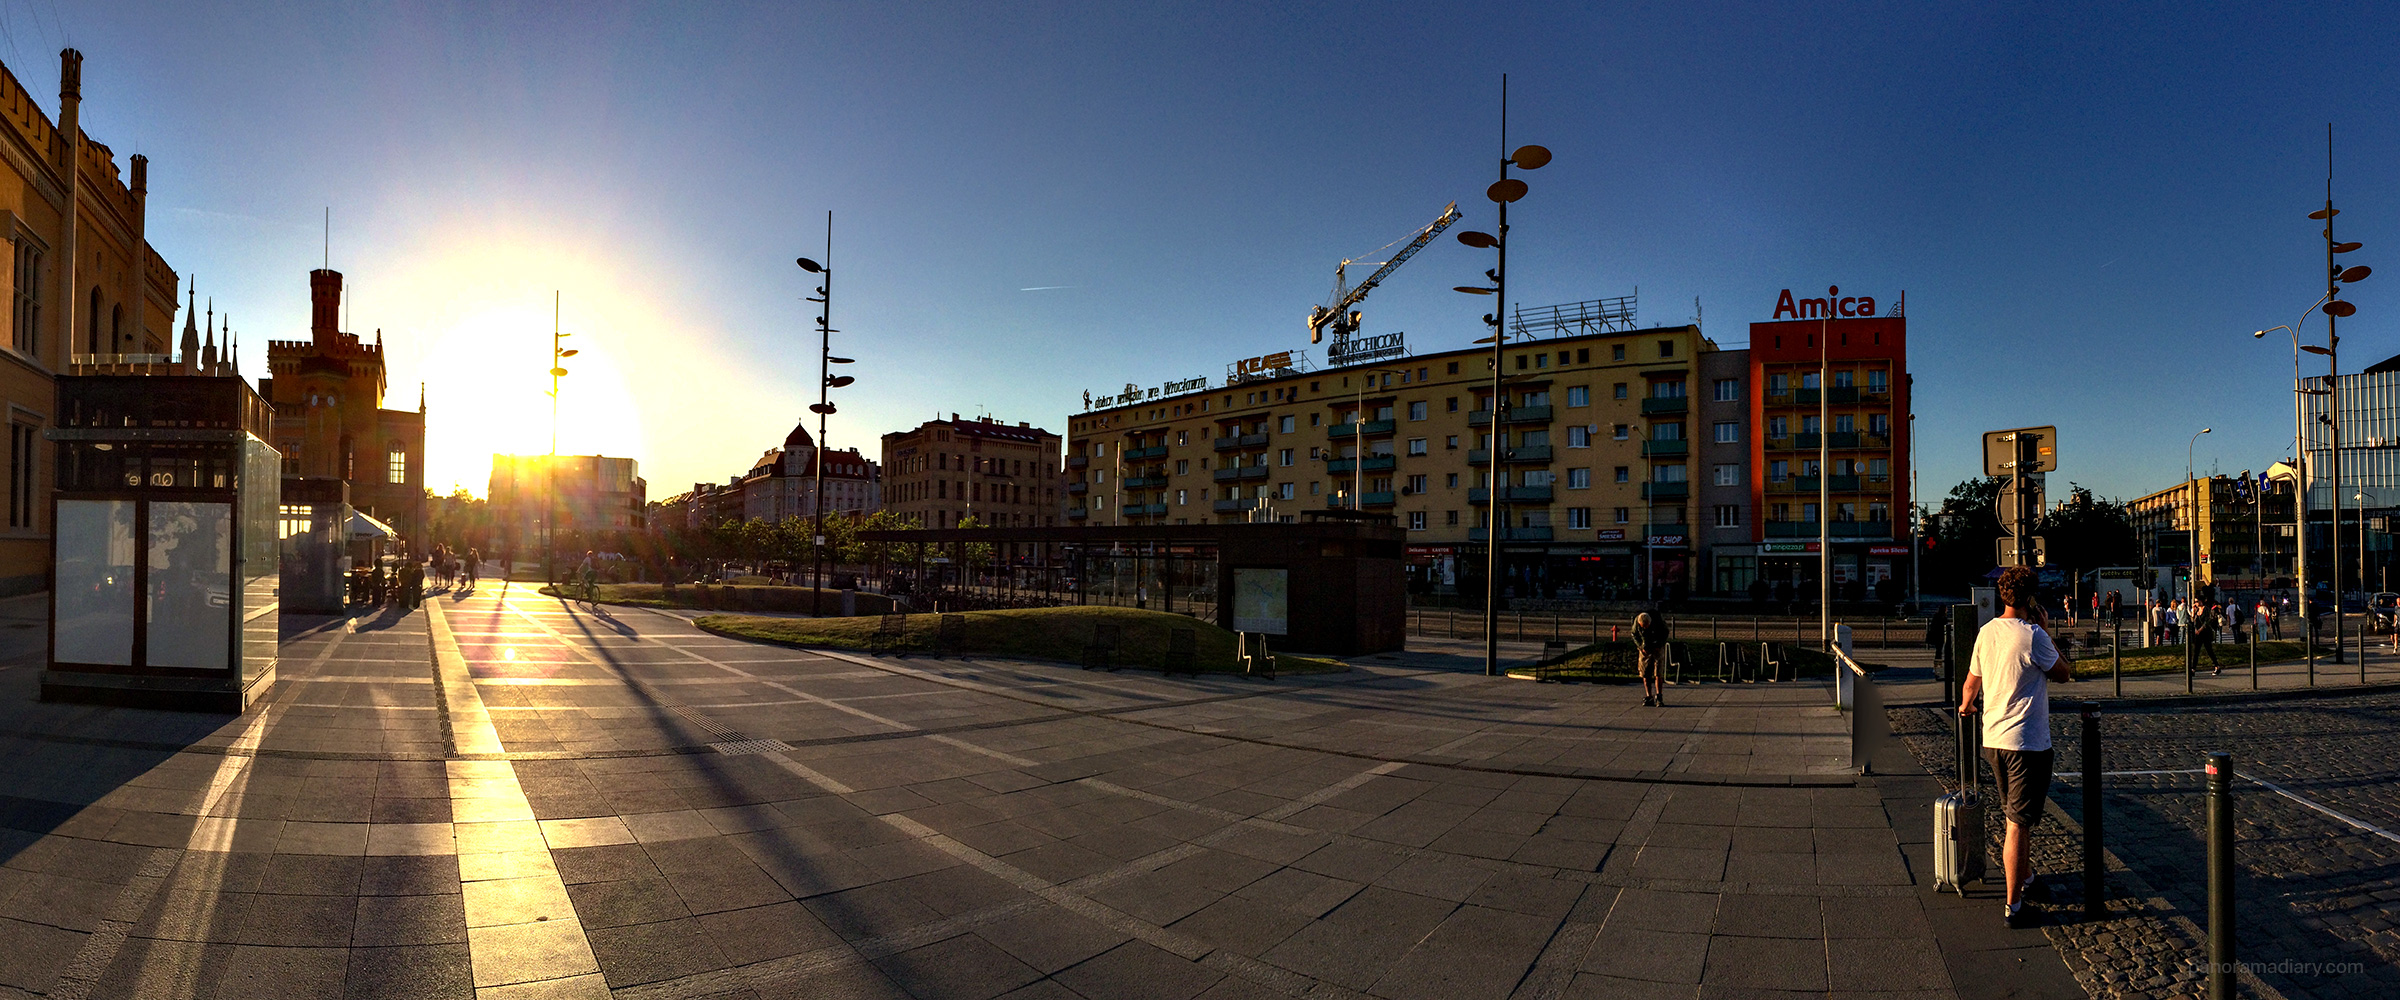 PANORAMA DIARY | Iphoneography blog | Good evening Wroclaw